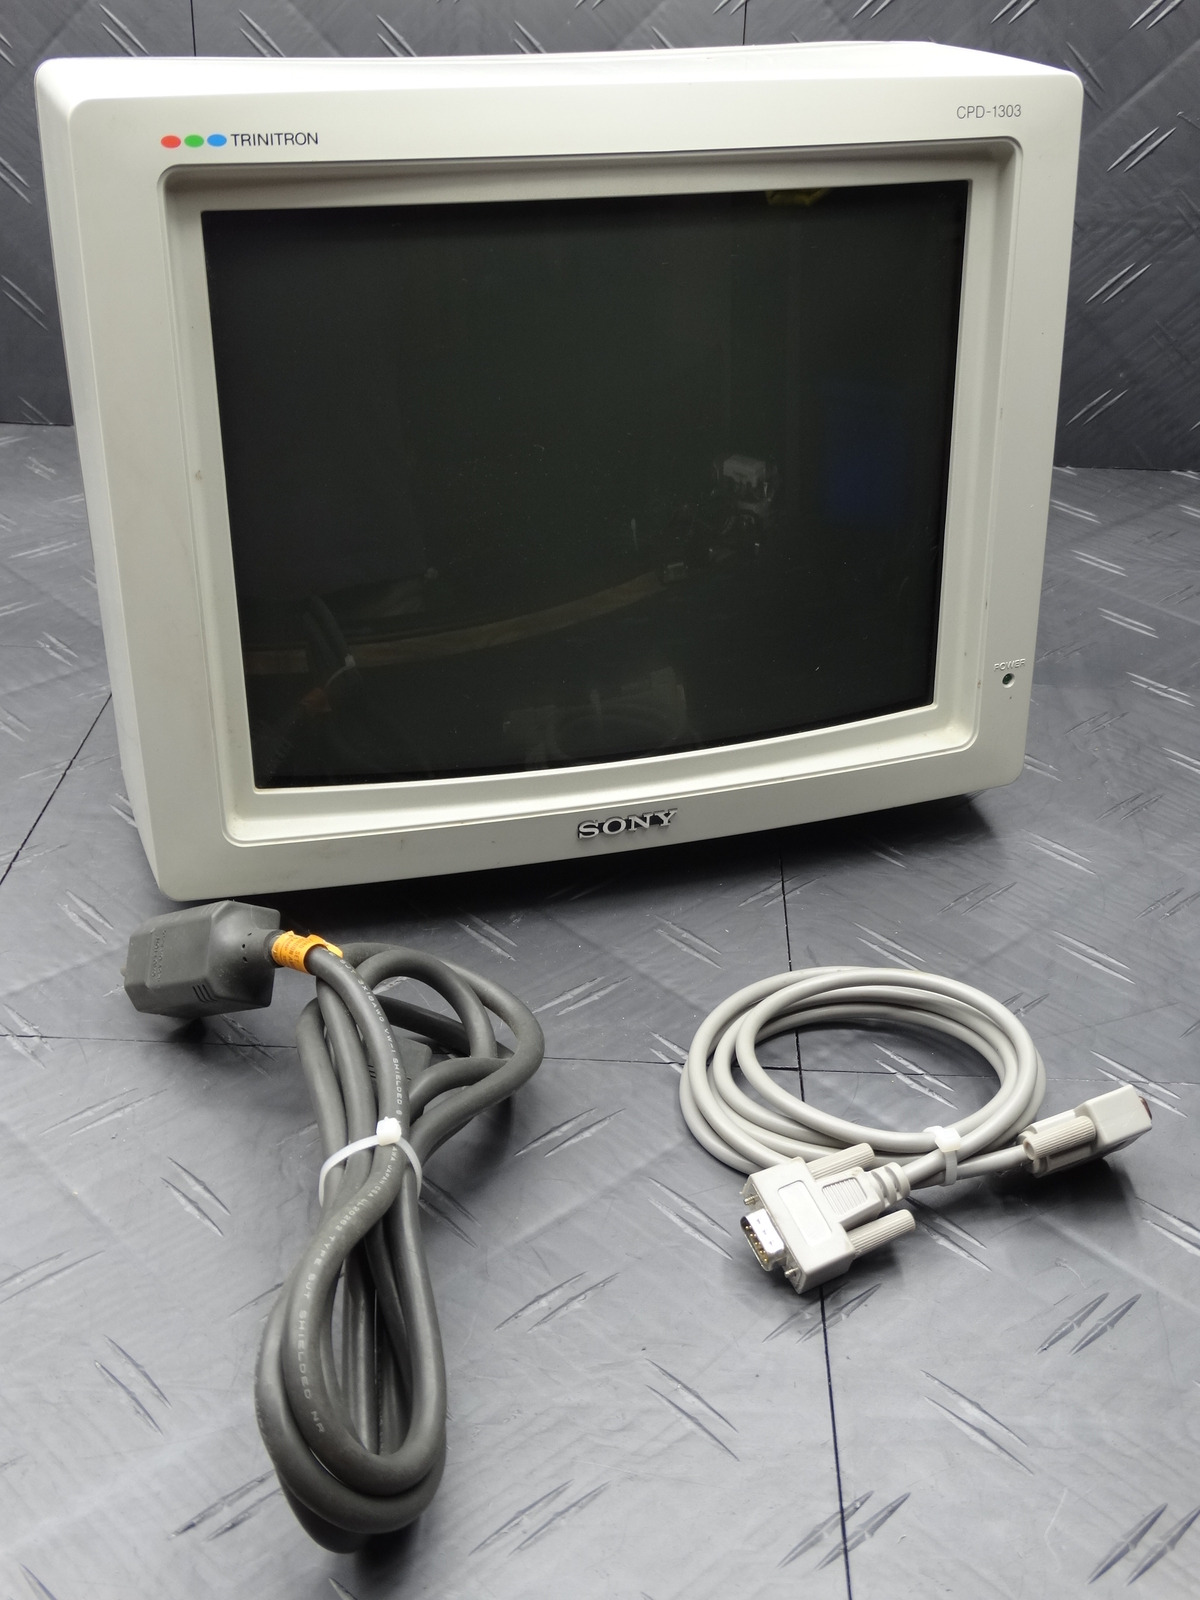 Sony Trinitron CRT Monitor Character Display CPD-1303 Made in Japan RARE